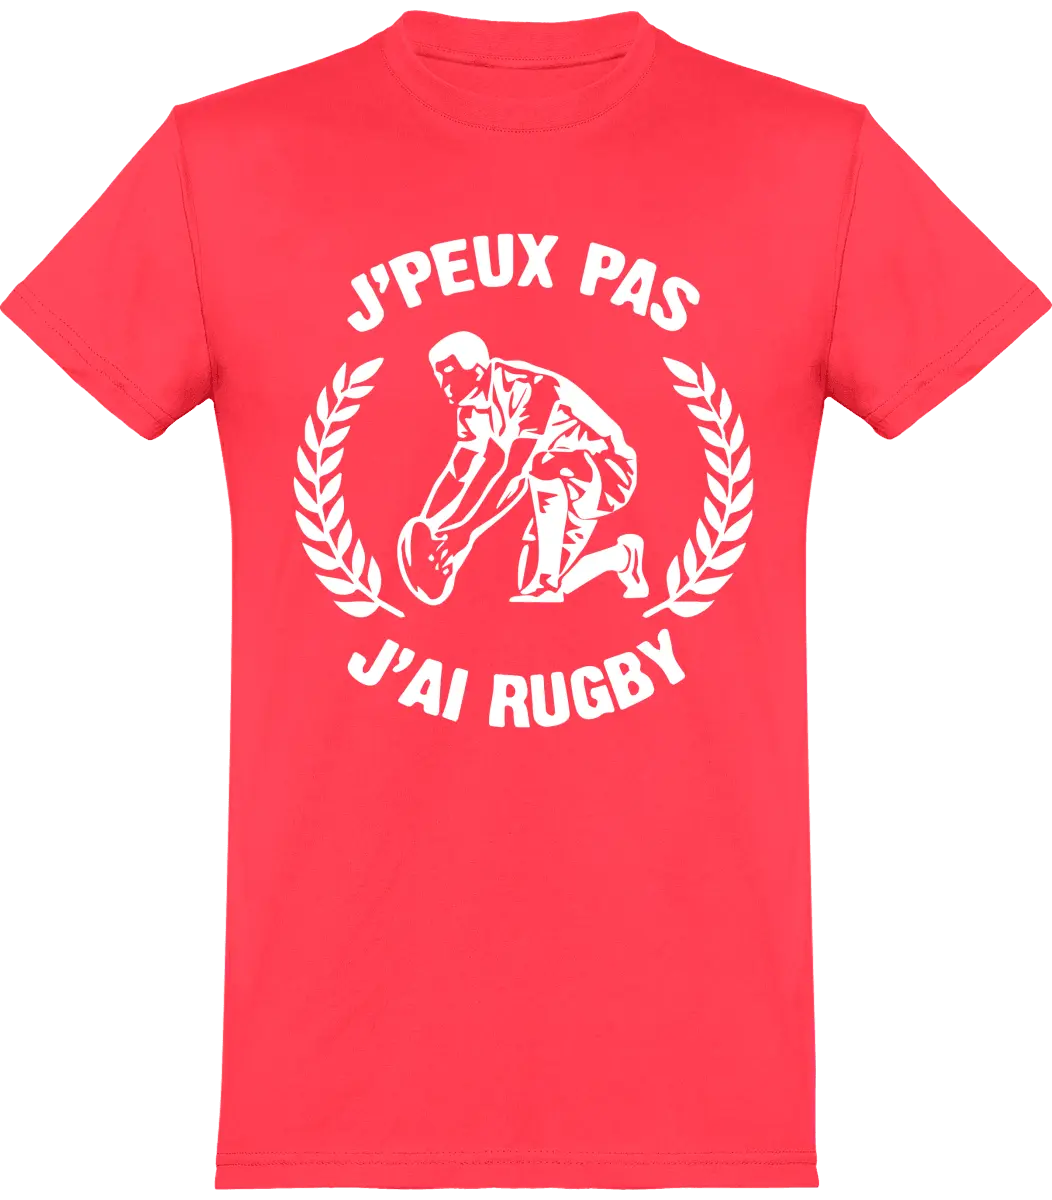 T-shirt Rugby "J'peux pas j'ai rugby" | Mixte - French Humour